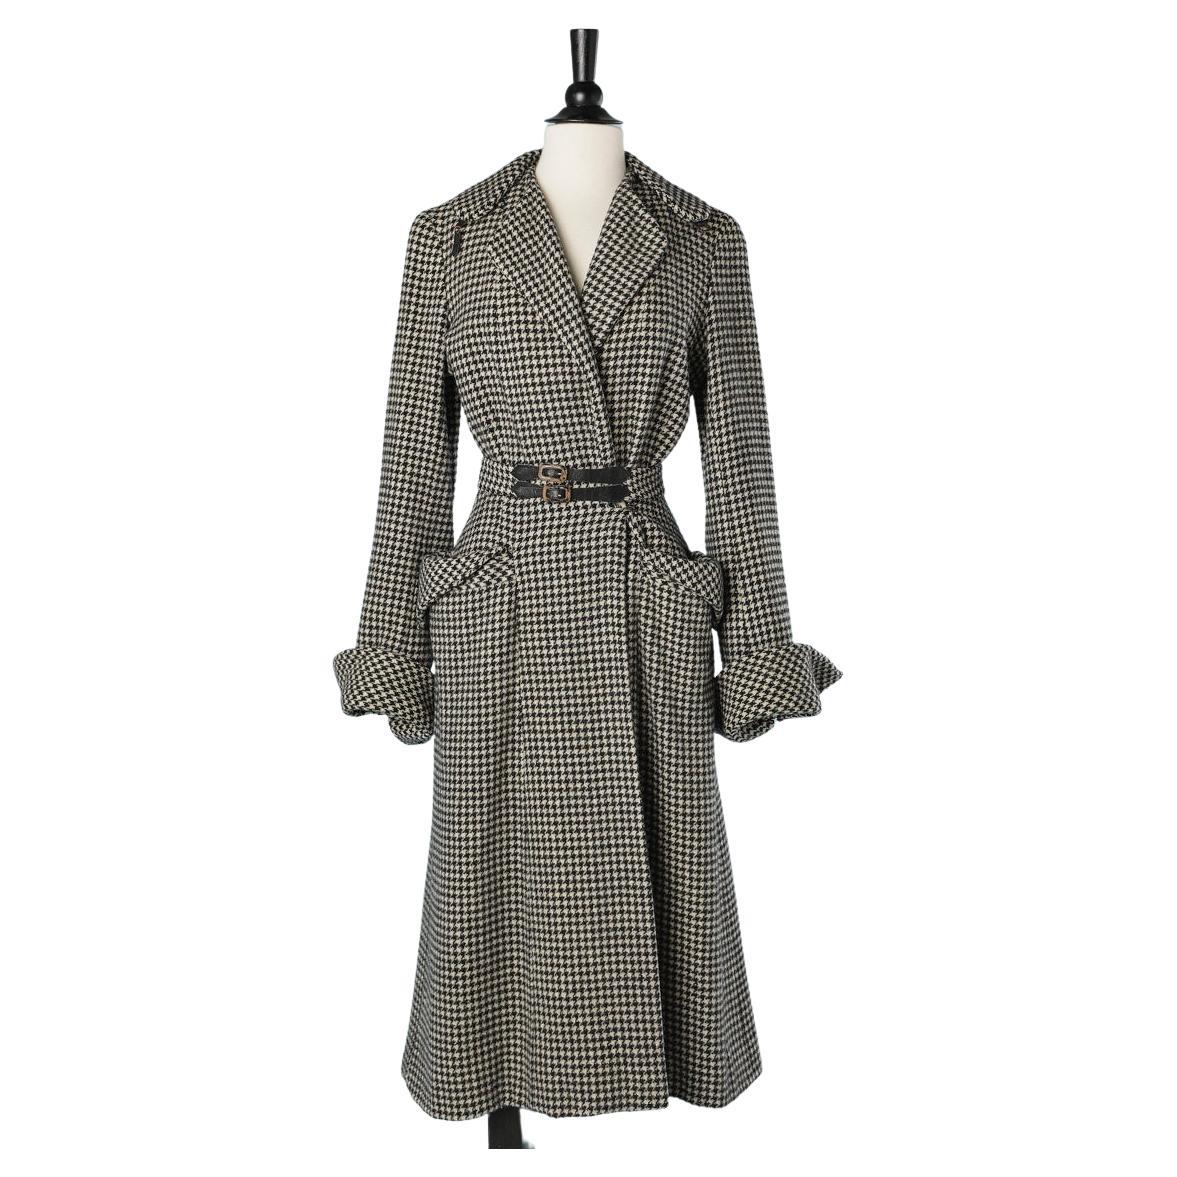 Black and white wool houndstooth pattern coat with belt Circa 1940's 